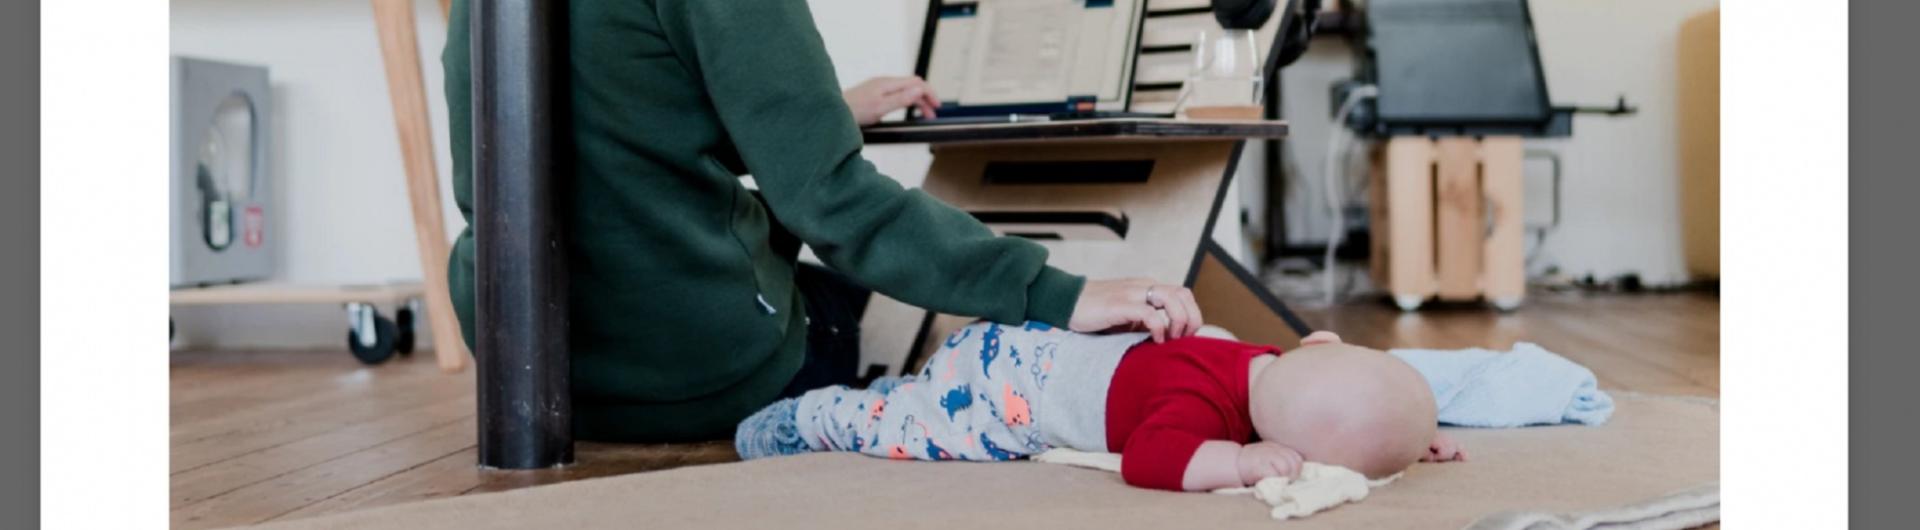 Mother working from home with a baby on the floor